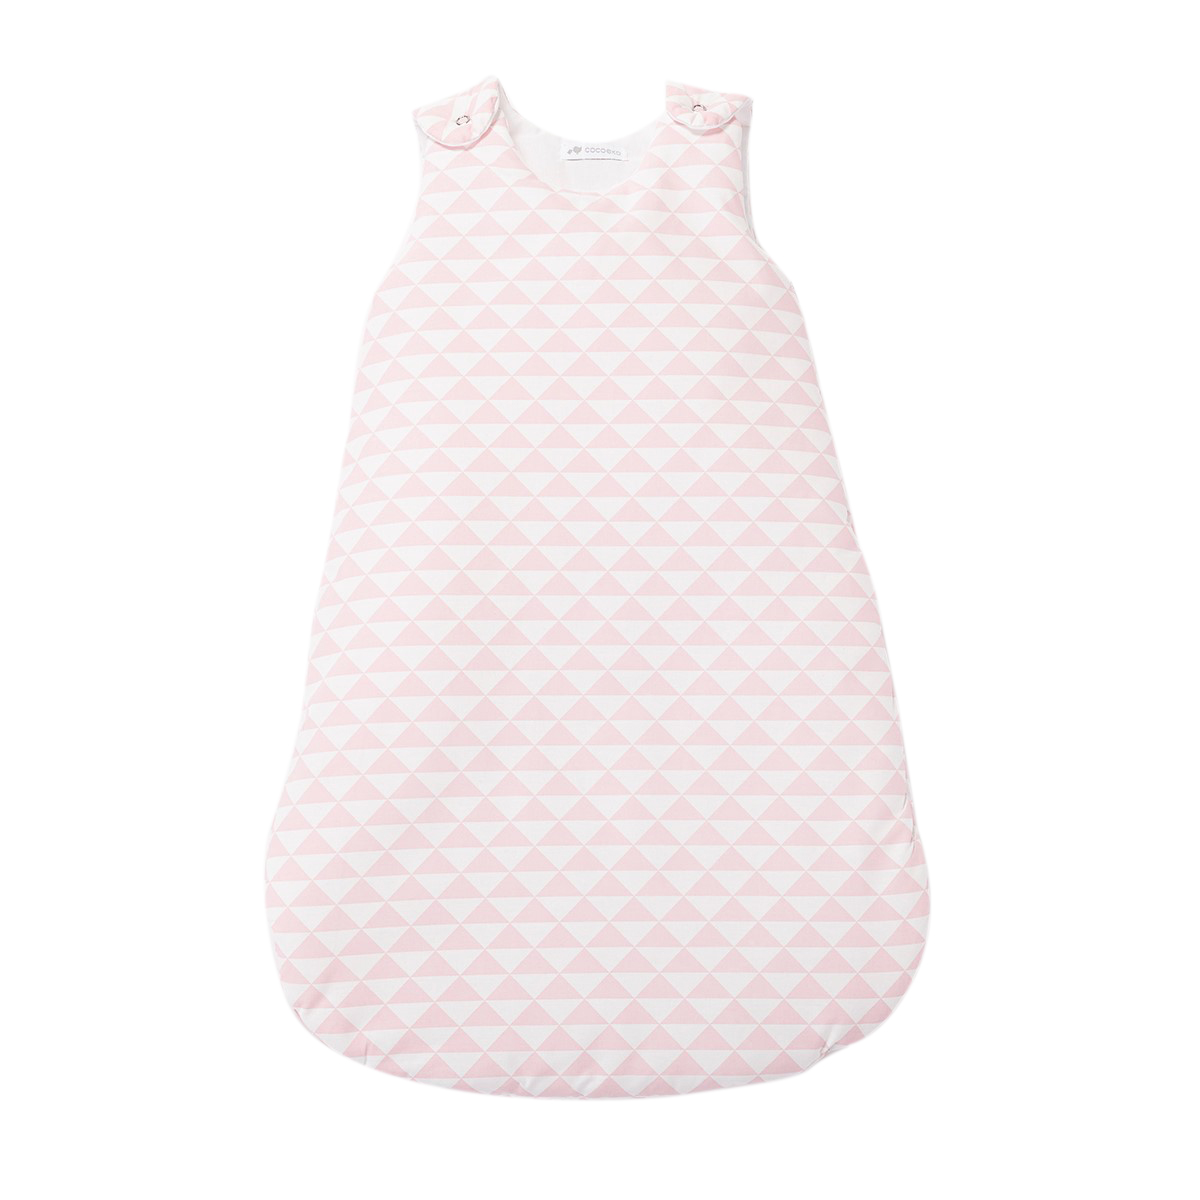 Gigoteuse triangle rose layette